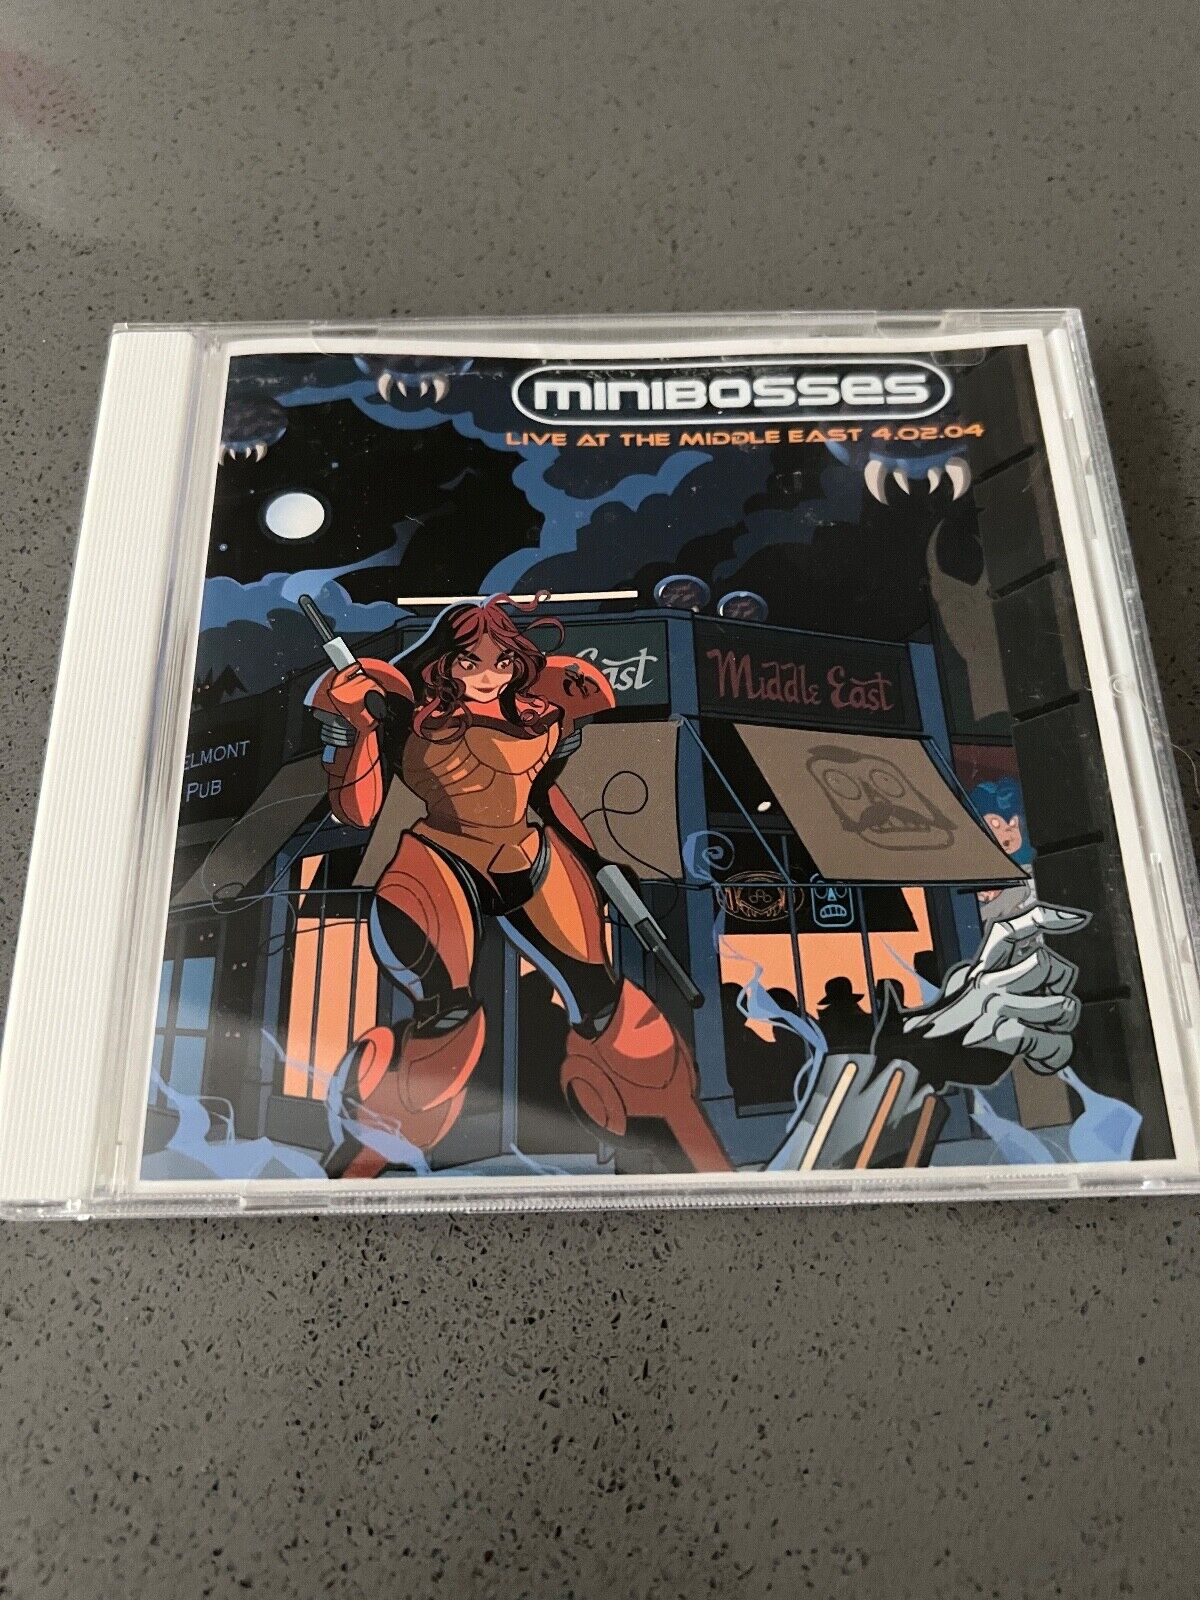 Minibosses  Live at Middle East NES Game CD Rock Band (You Knighted Nations)